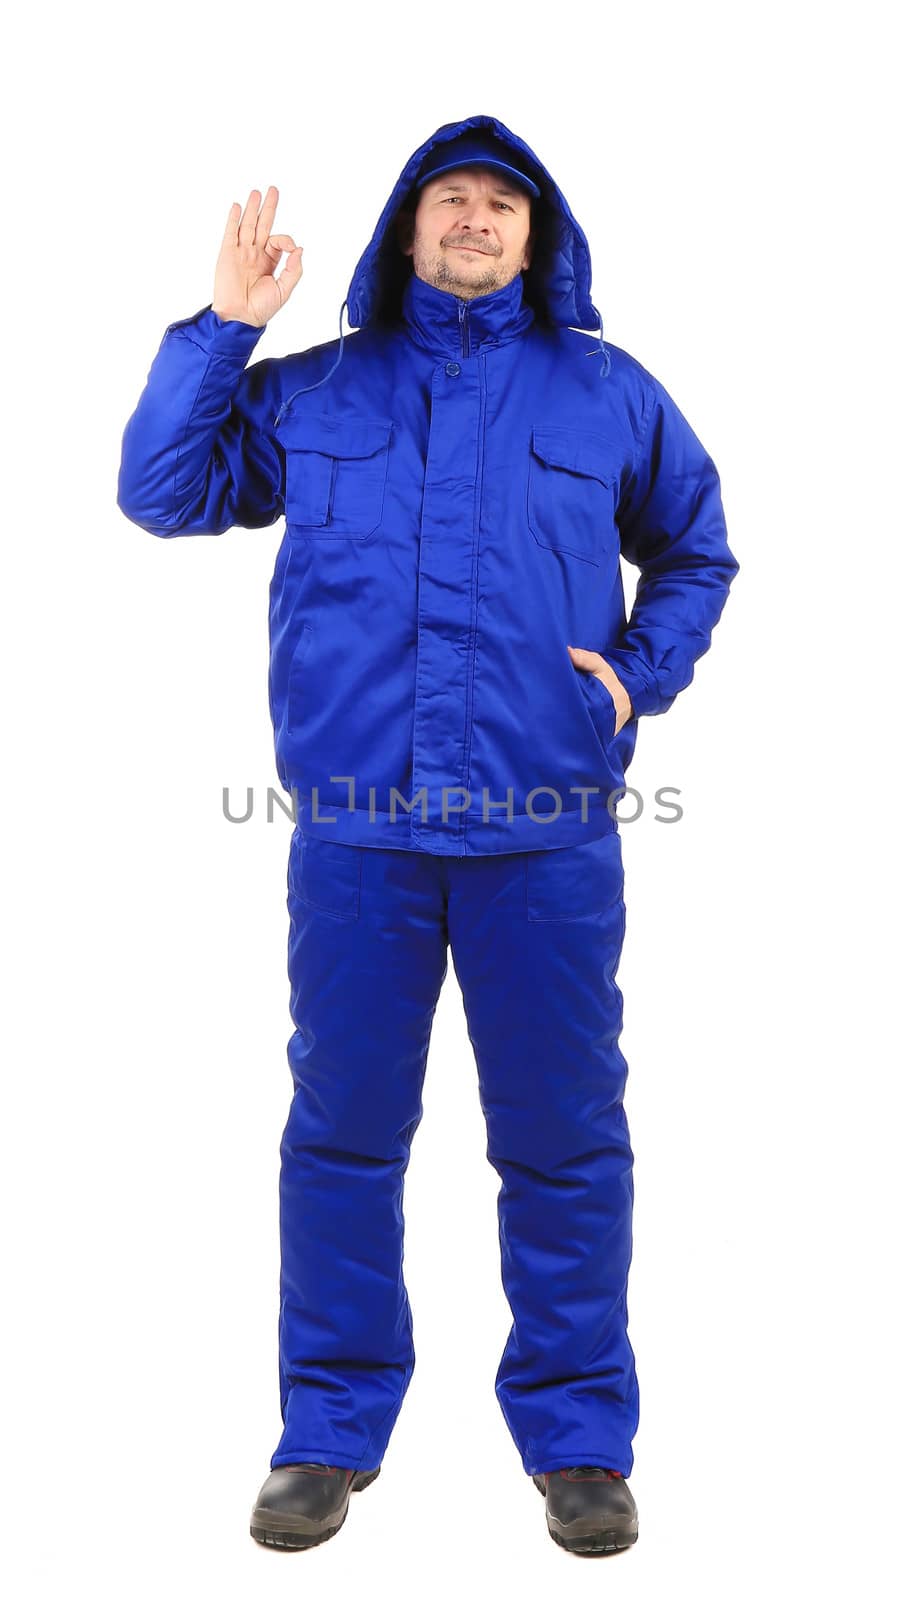 Nam in blue jacket. Isolated on a white background.